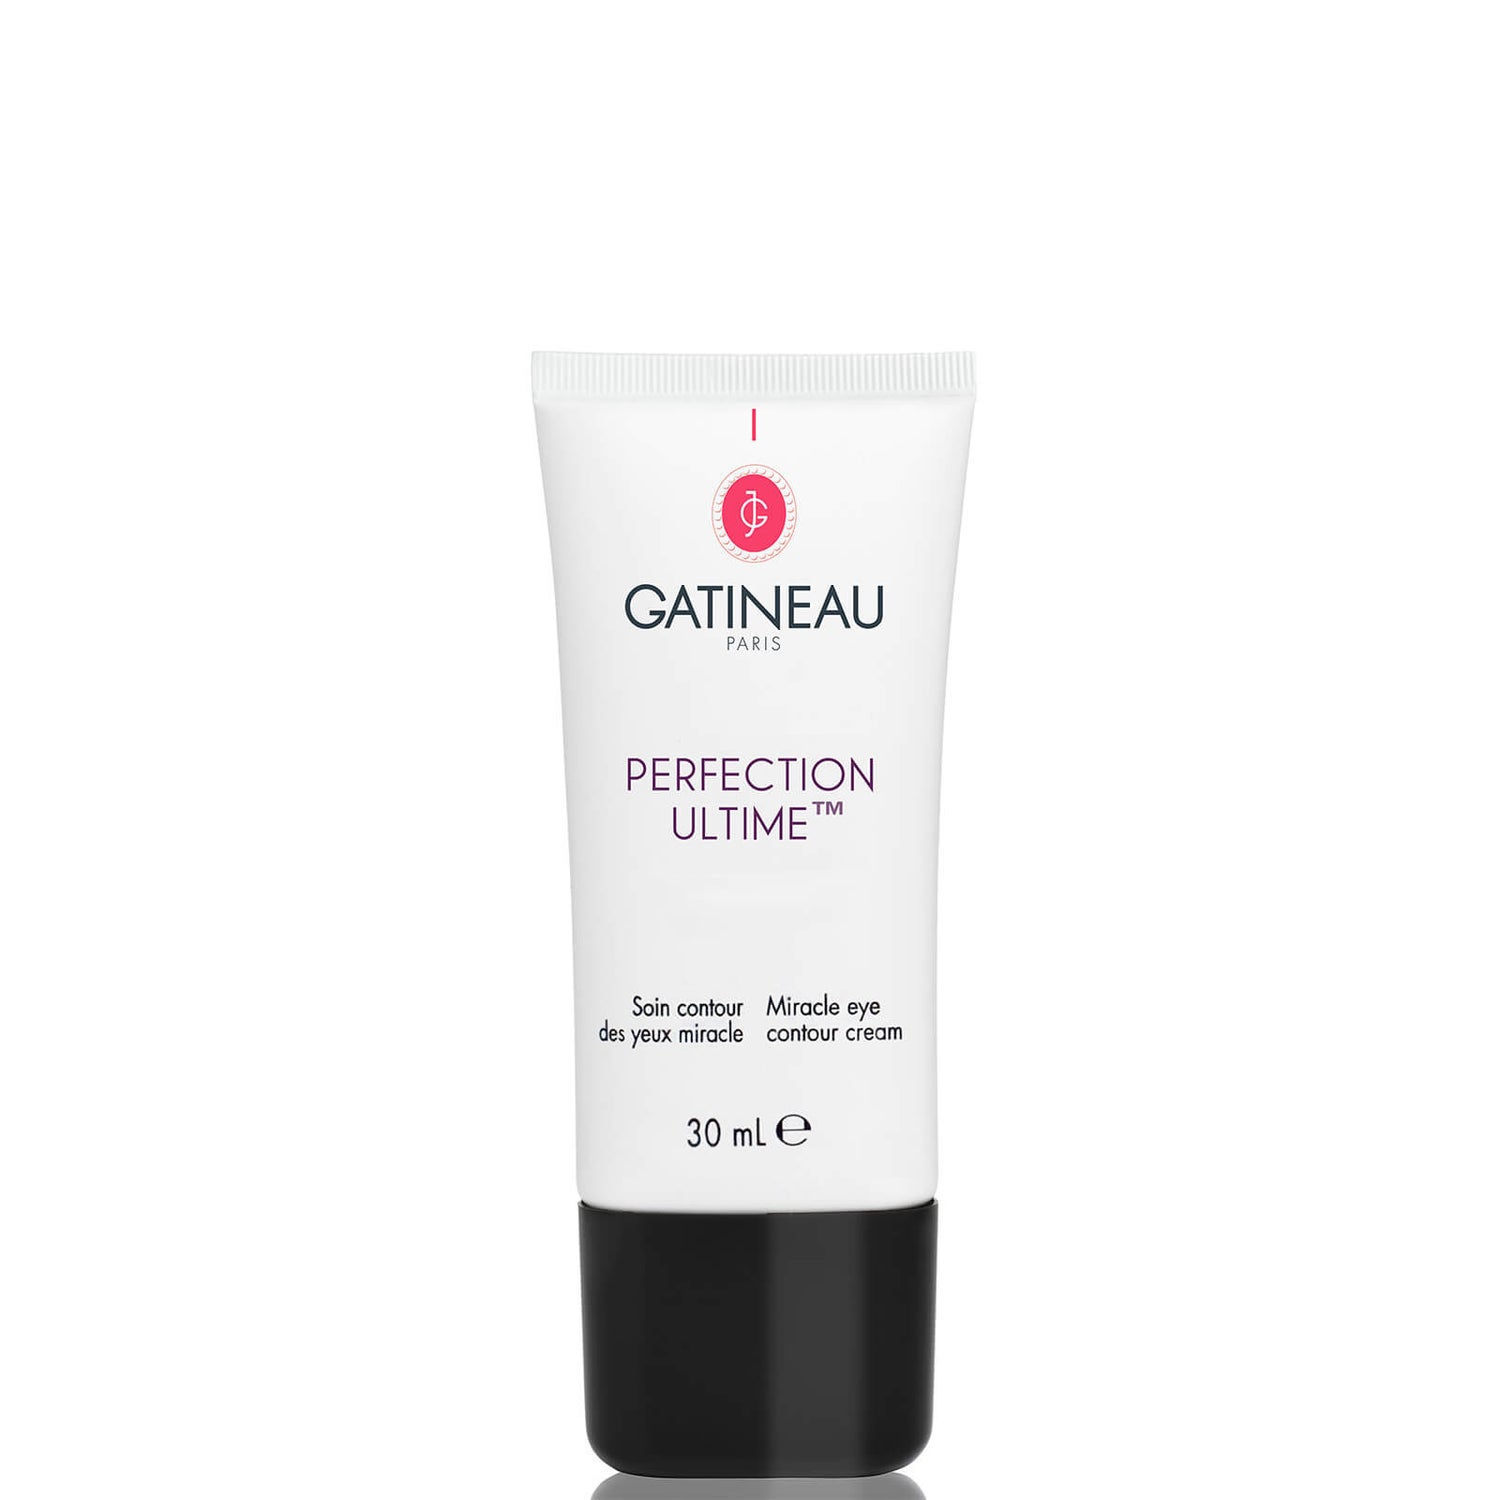 Gatineau Perfection Ultime Miracle Eye Contour Cream Supersize 30ml